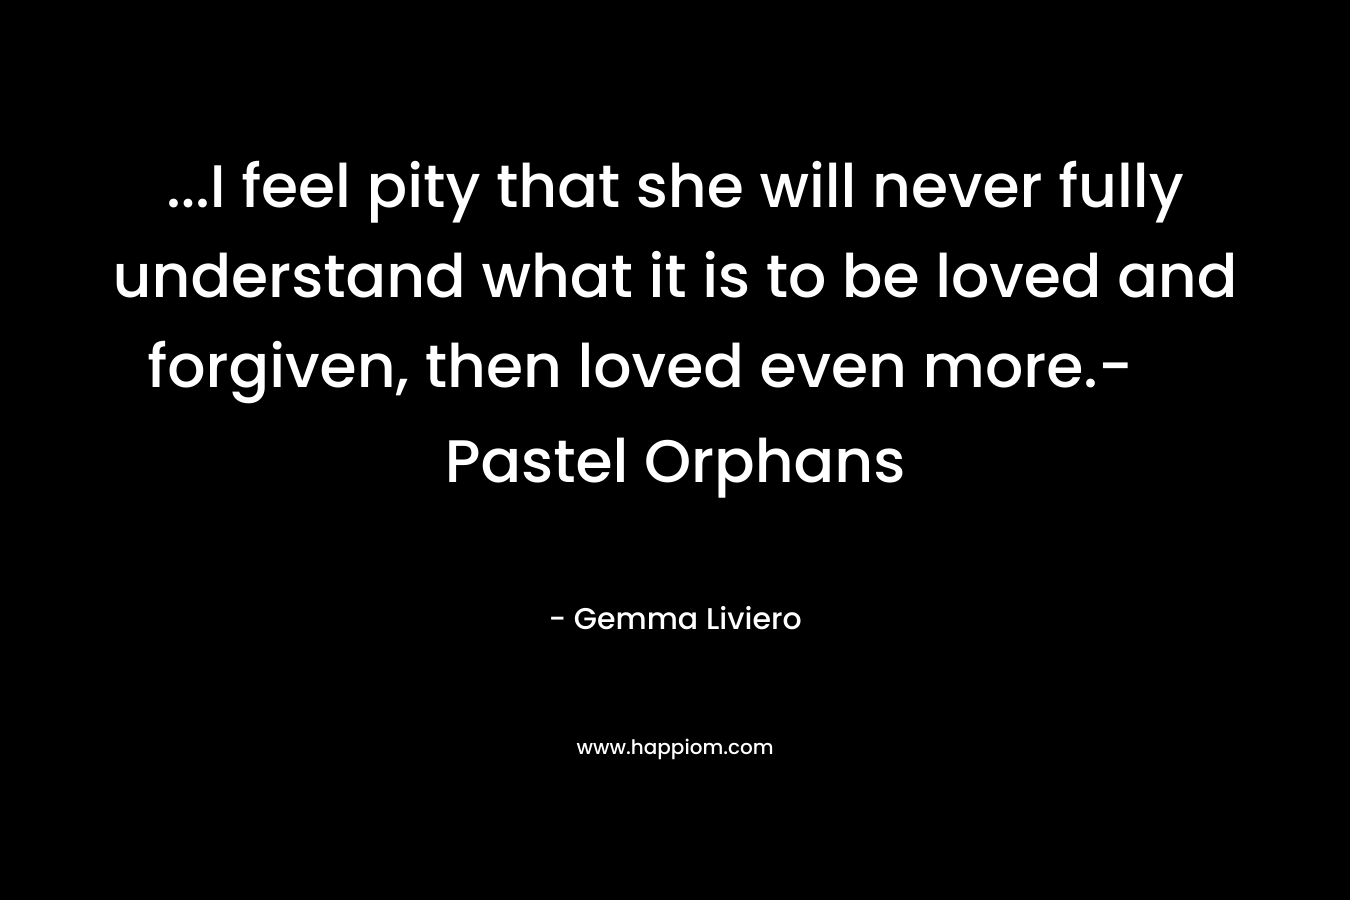 ...I feel pity that she will never fully understand what it is to be loved and forgiven, then loved even more.- Pastel Orphans